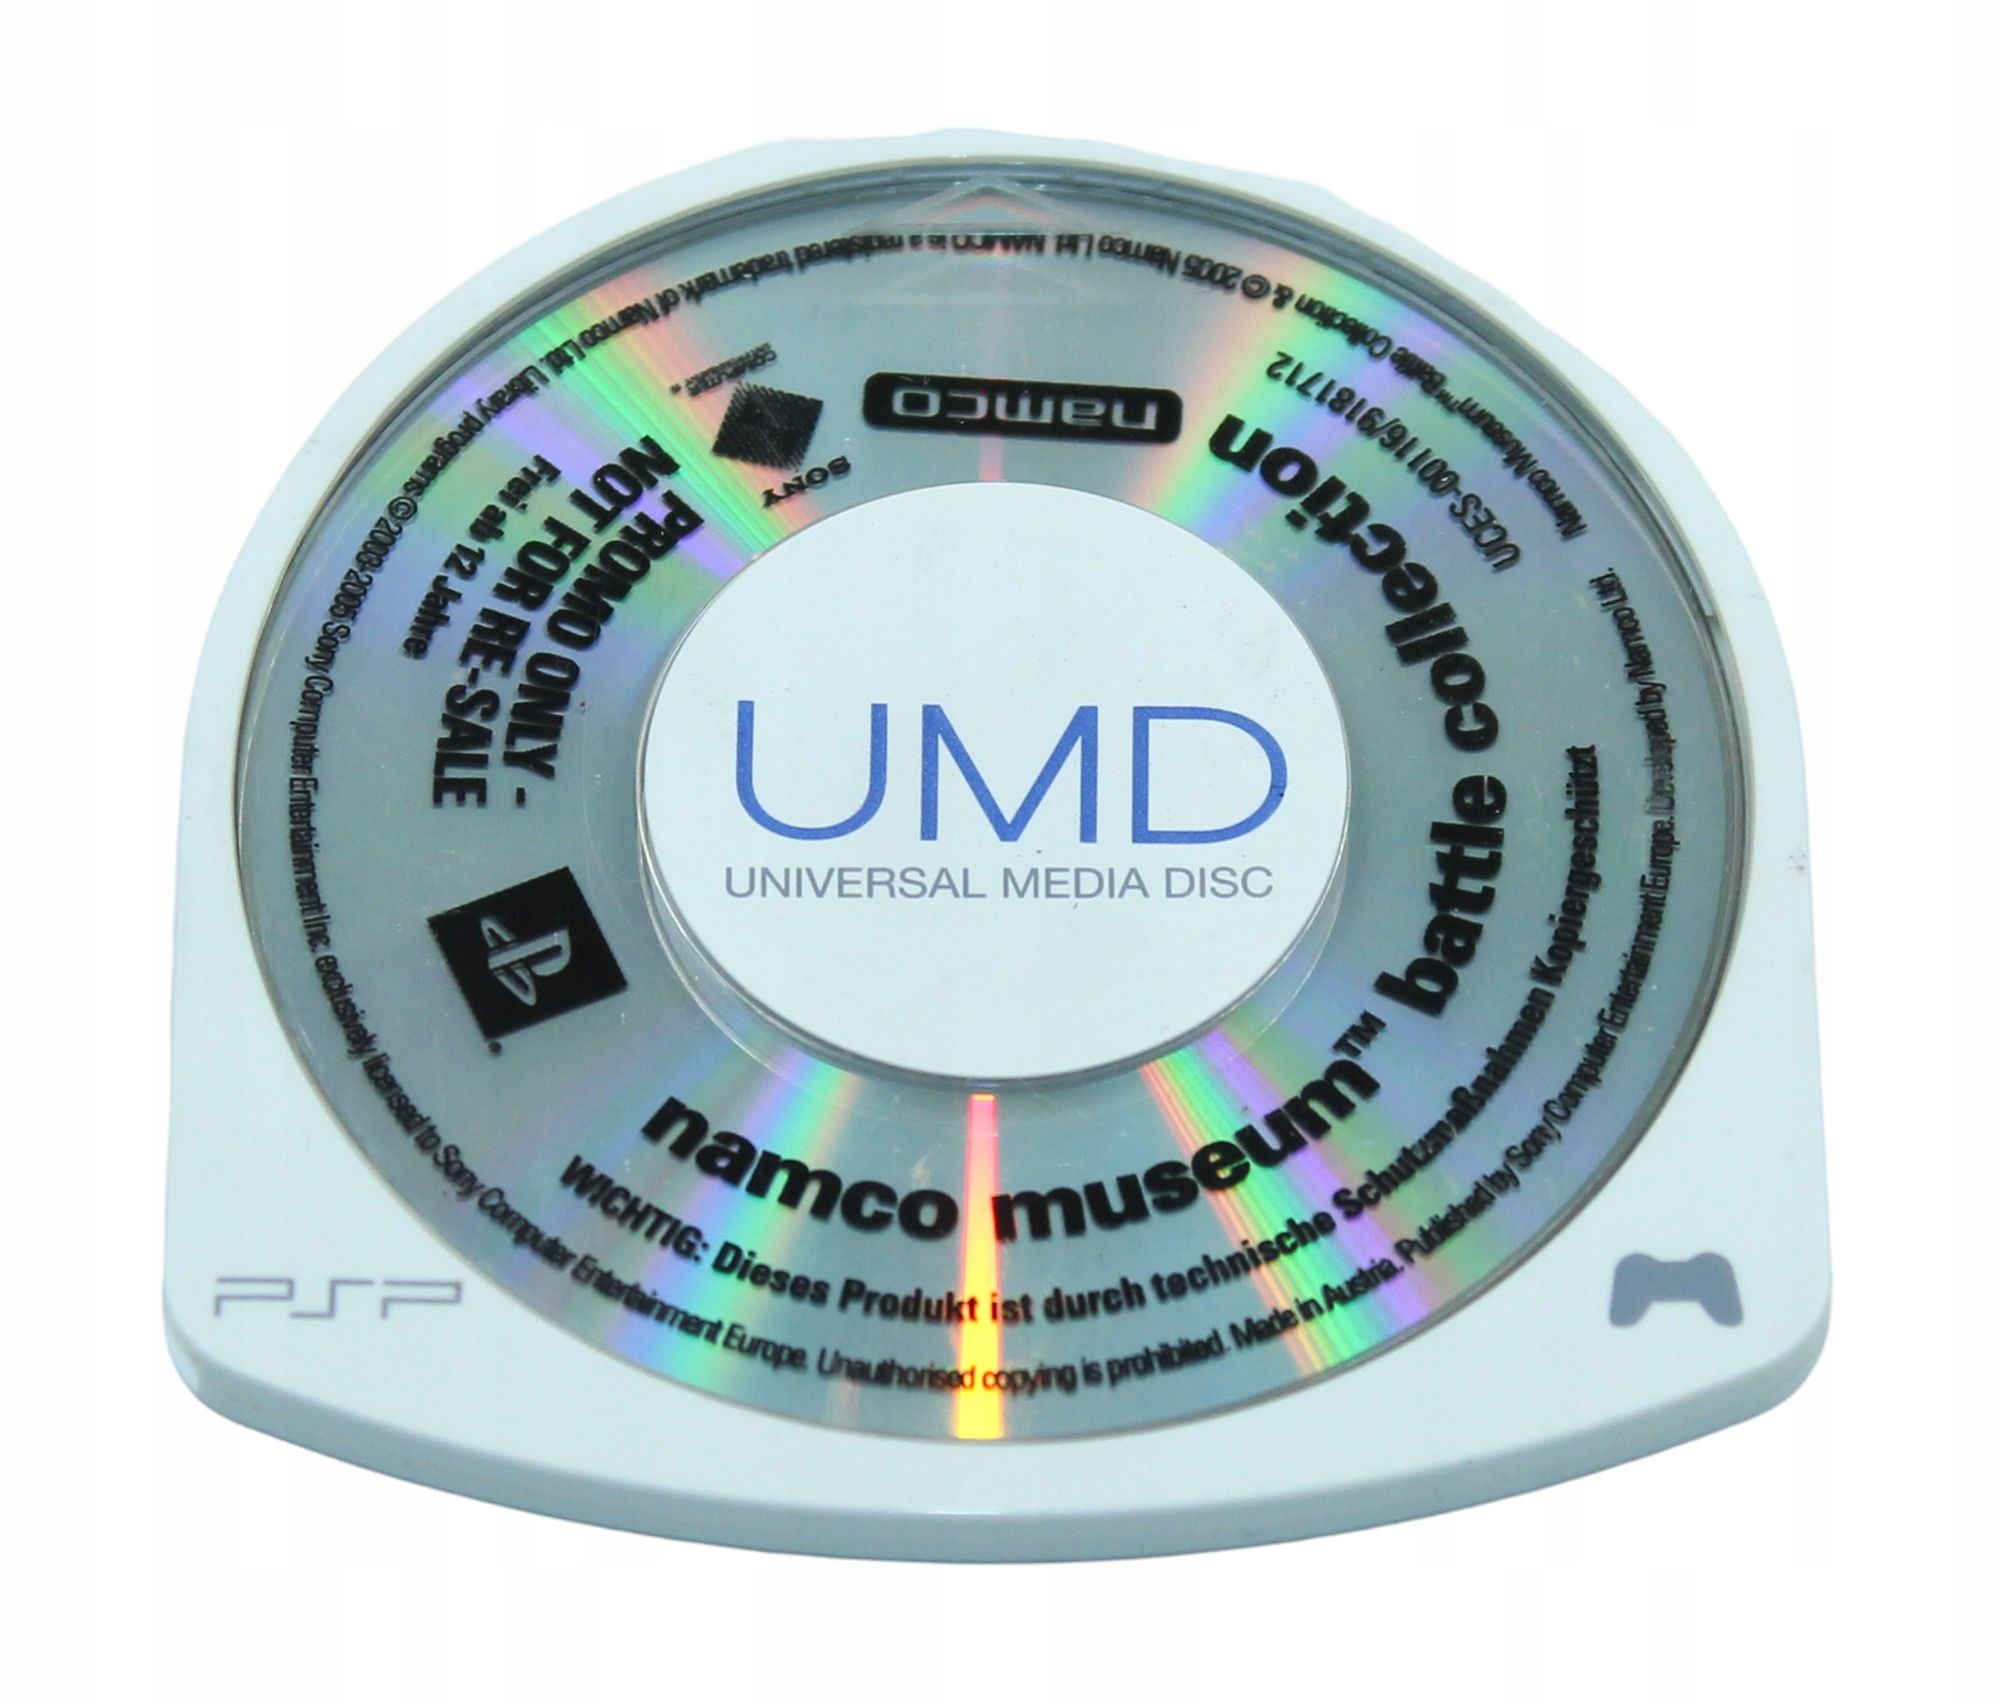 Namco Museum Battle Collection PROMO PlayStation Portable PSP